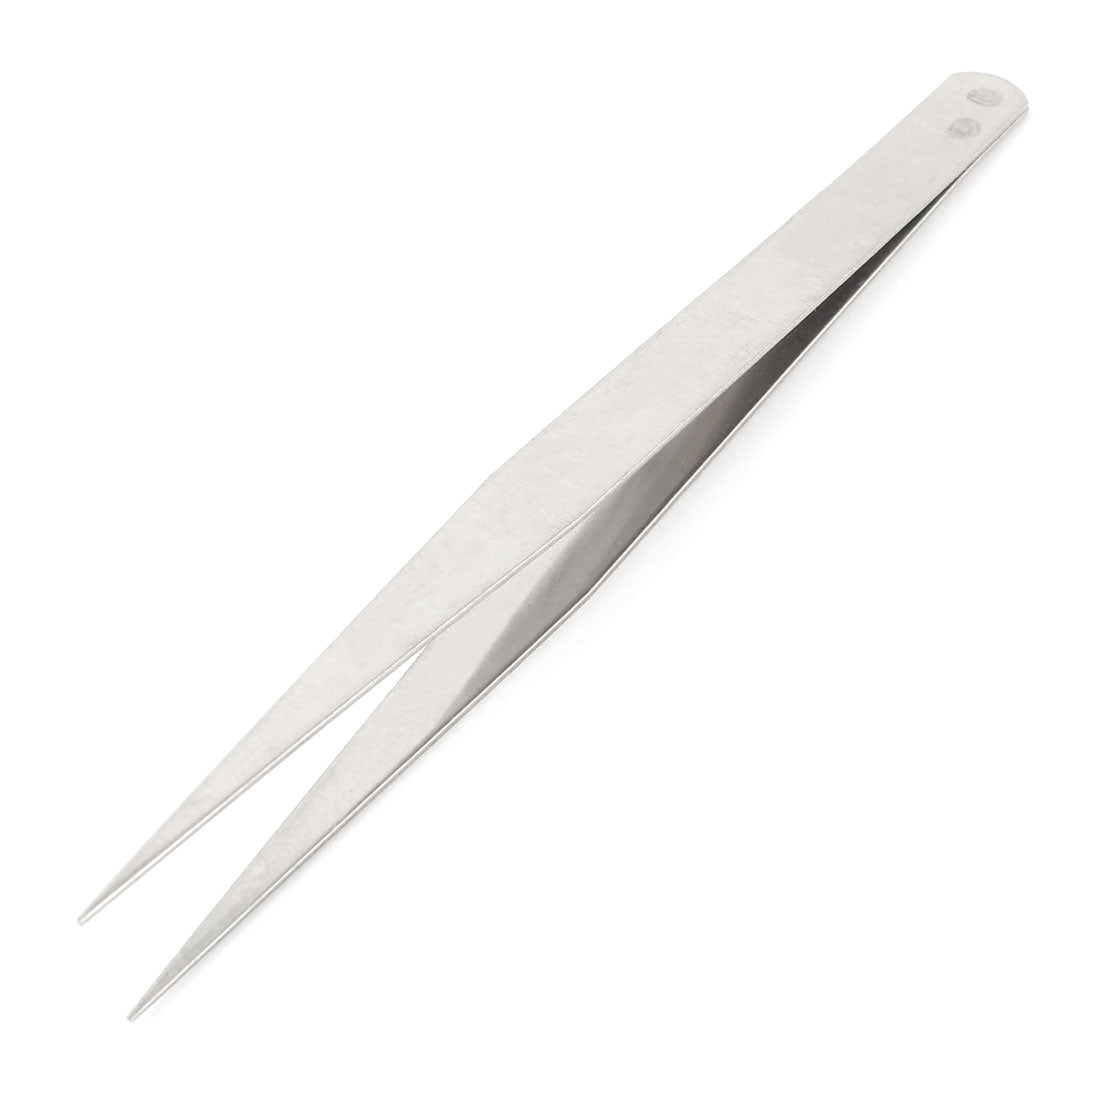 uxcell Uxcell Stainless Steel Pointy Tip Straight Tweezers Forceps Manual Hand Tool 130mm Long